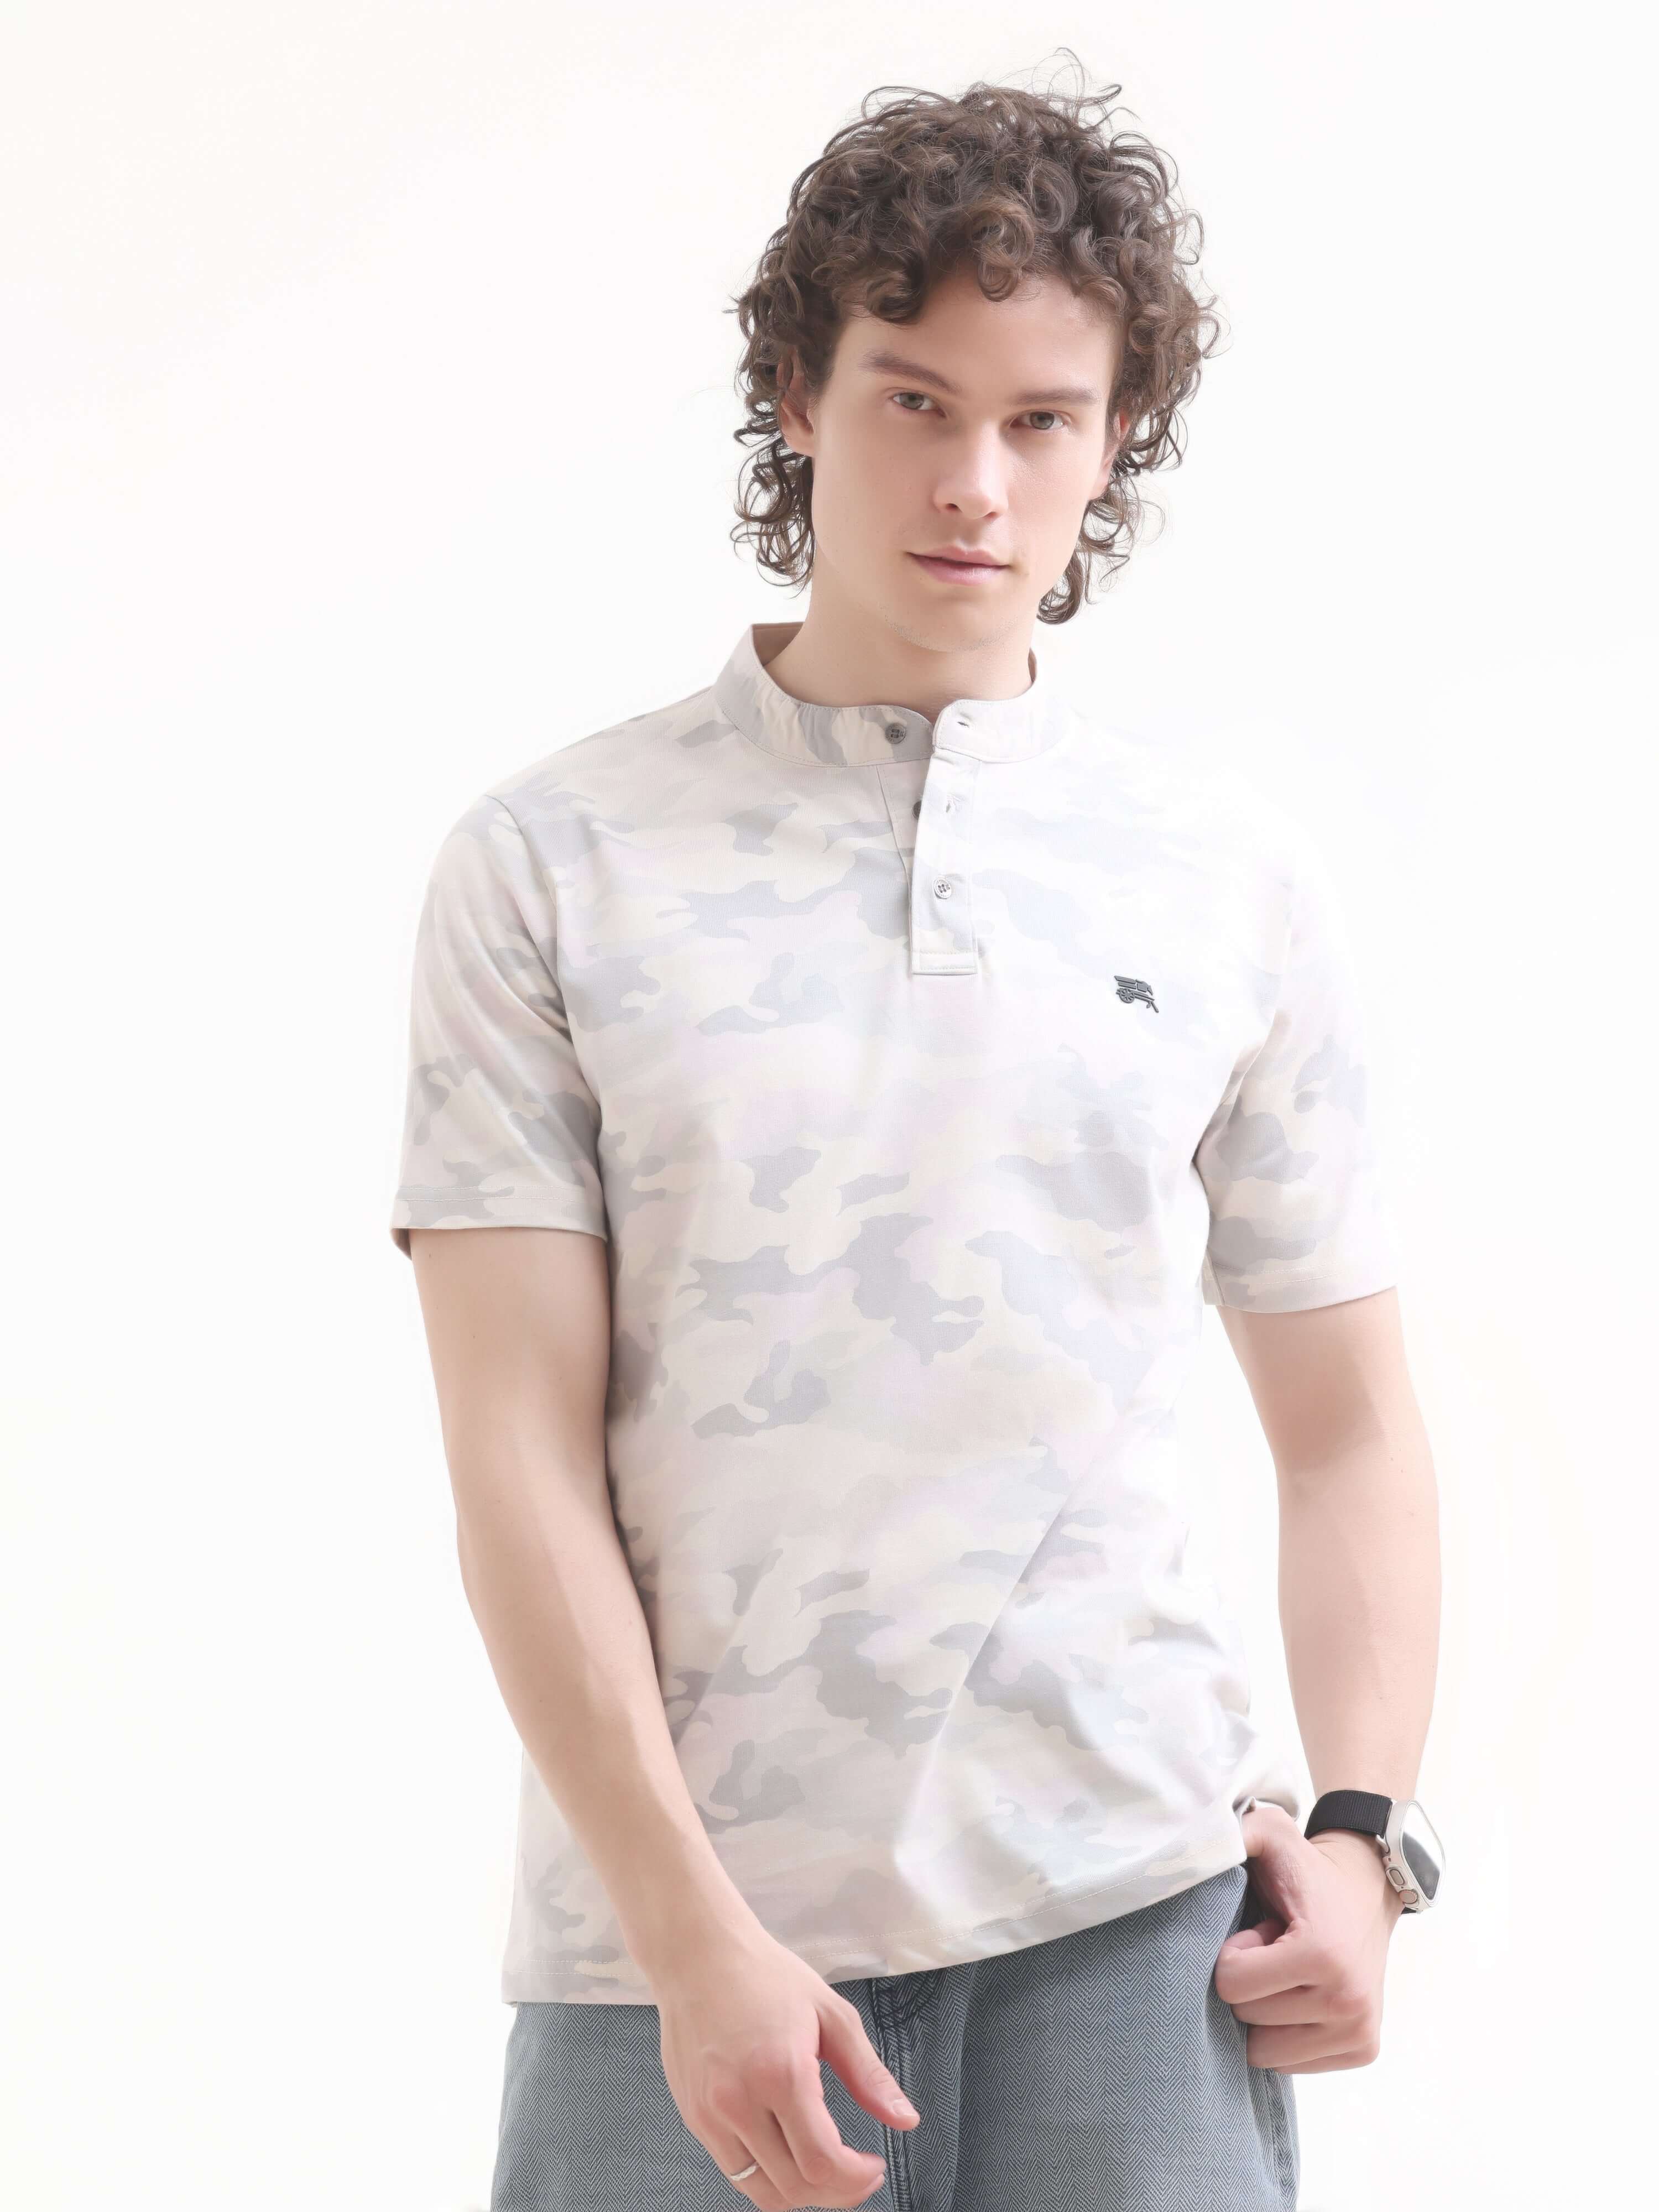 Military Camo Pink Henley Shirt - Men's Casual Summer Top shop online at Estilocus. Step up your style with our pink military camo Henley tee. Lightweight cotton, comfy fit & HD chest logo. Perfect for summer flair! Shop new arrivals.